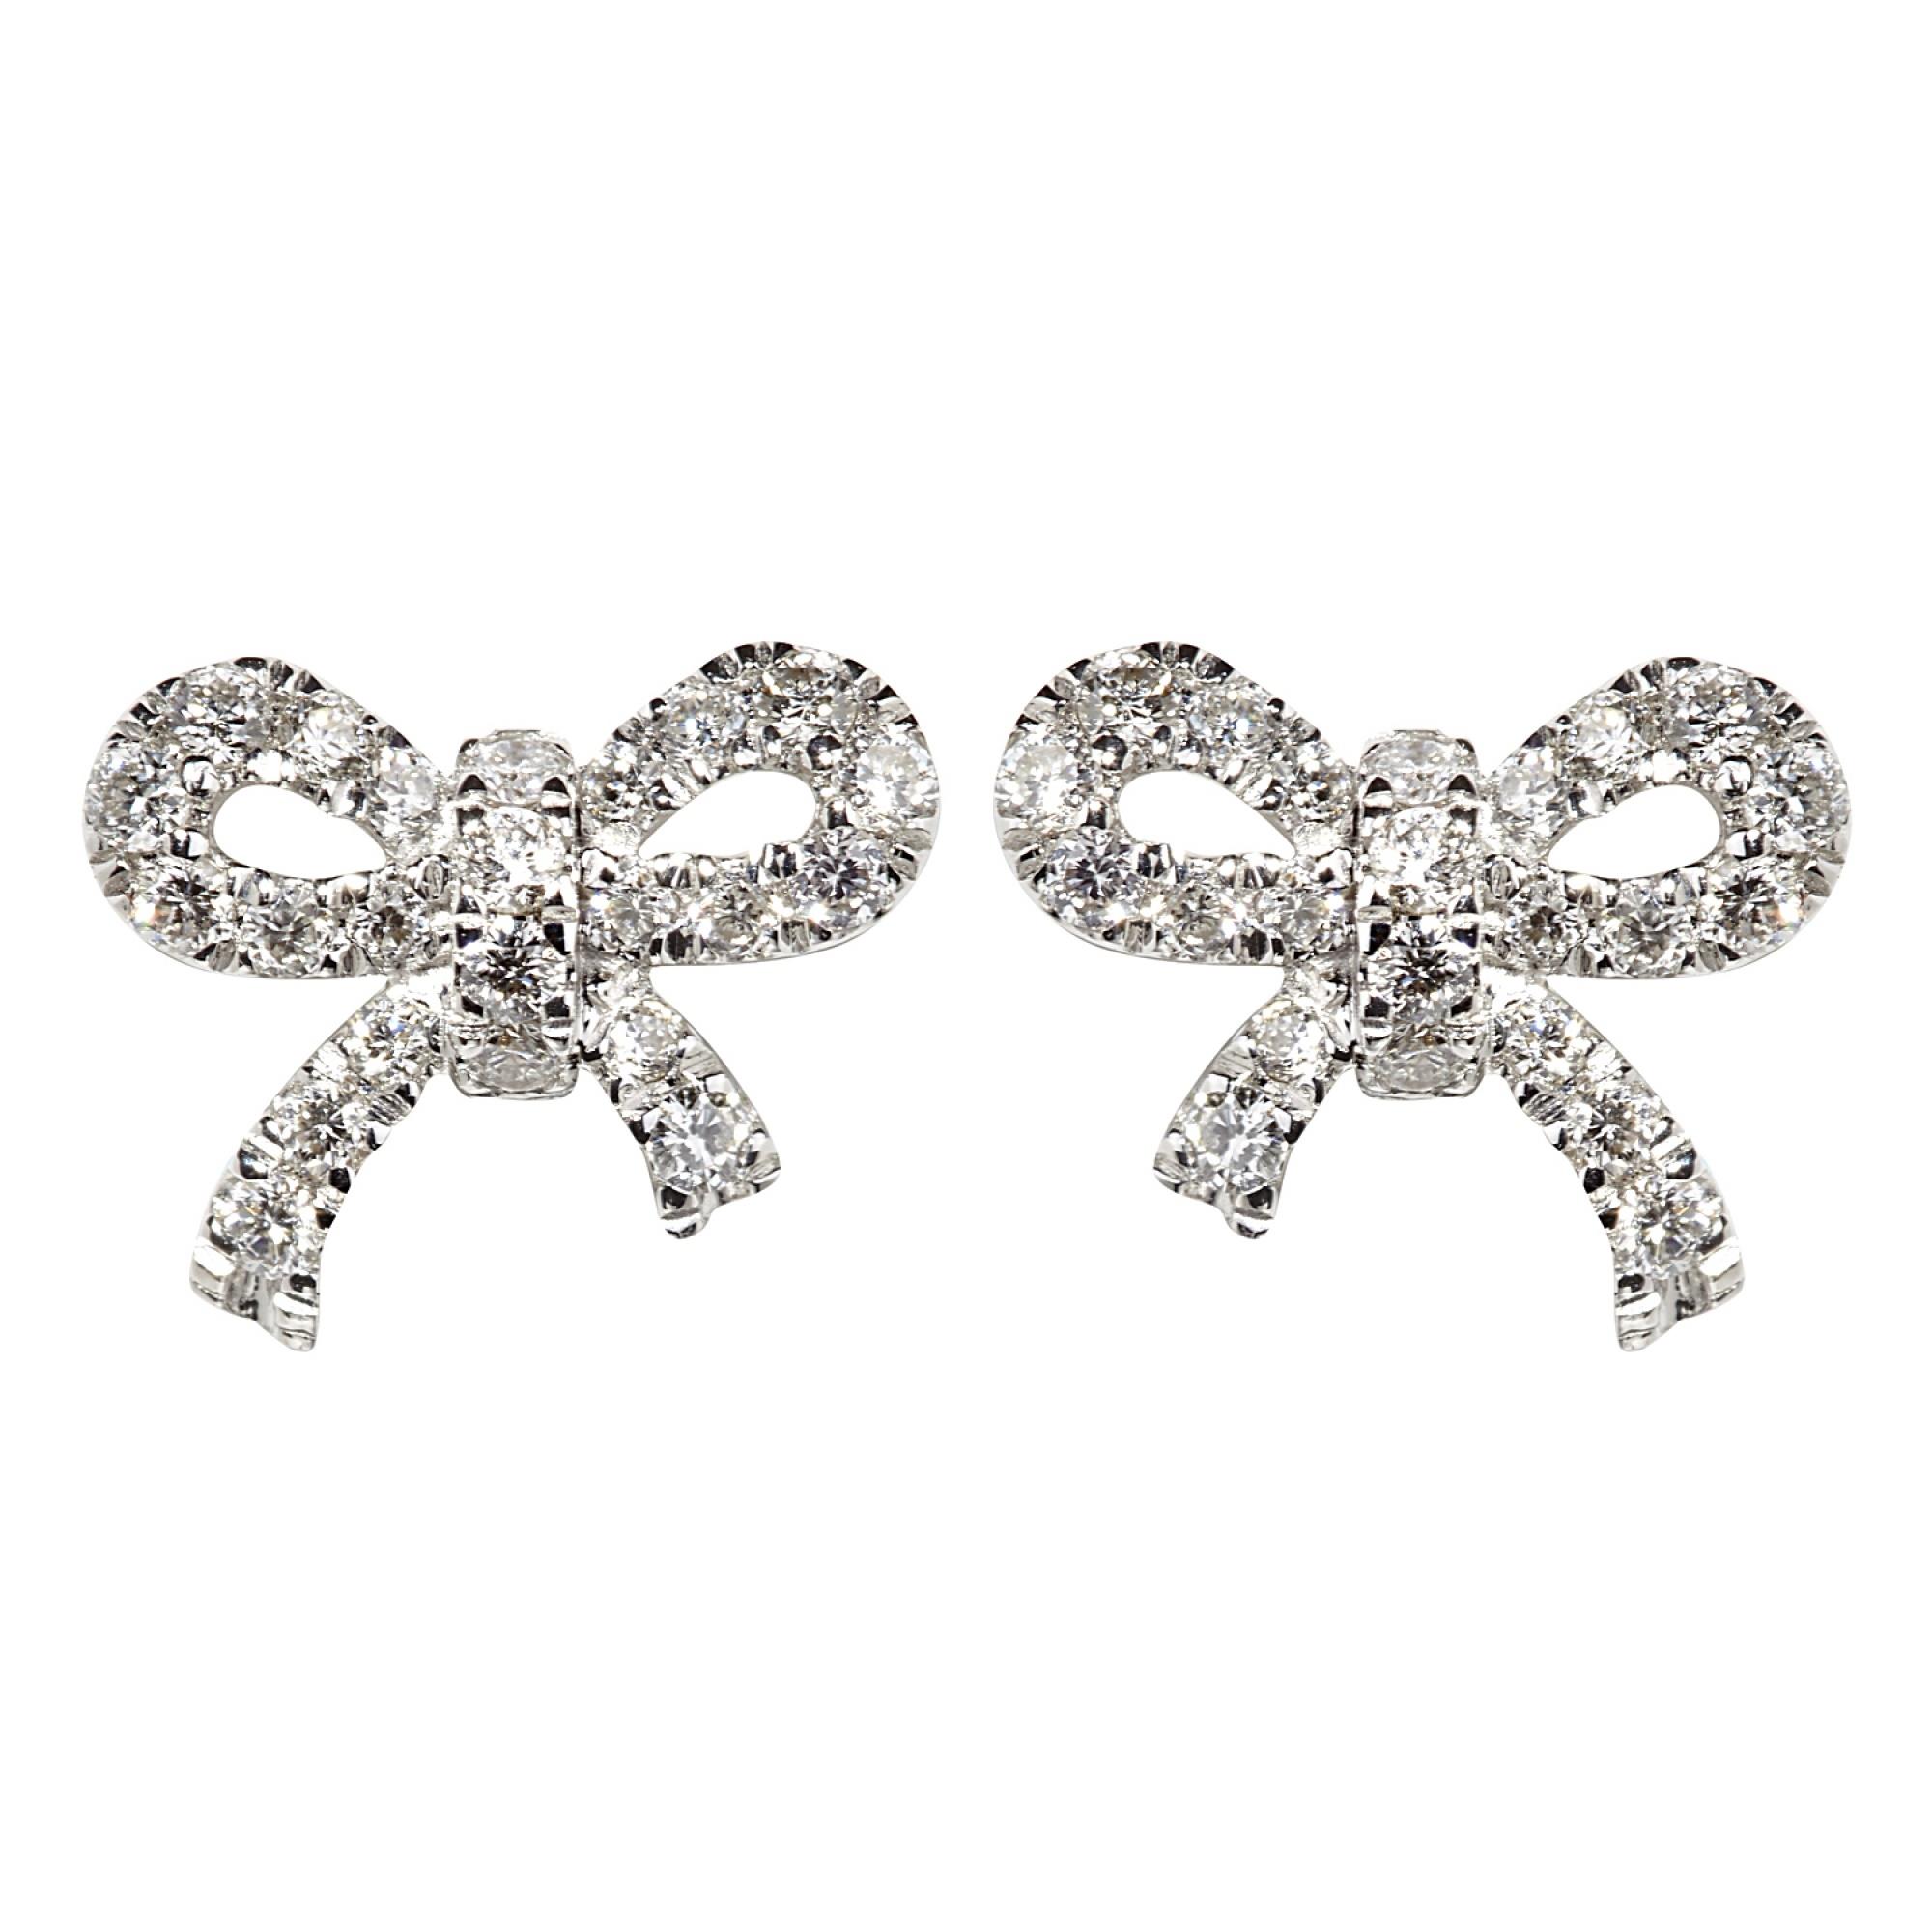 18ct White Gold Bow Shape Stud Earrings | Pravins Jewellers